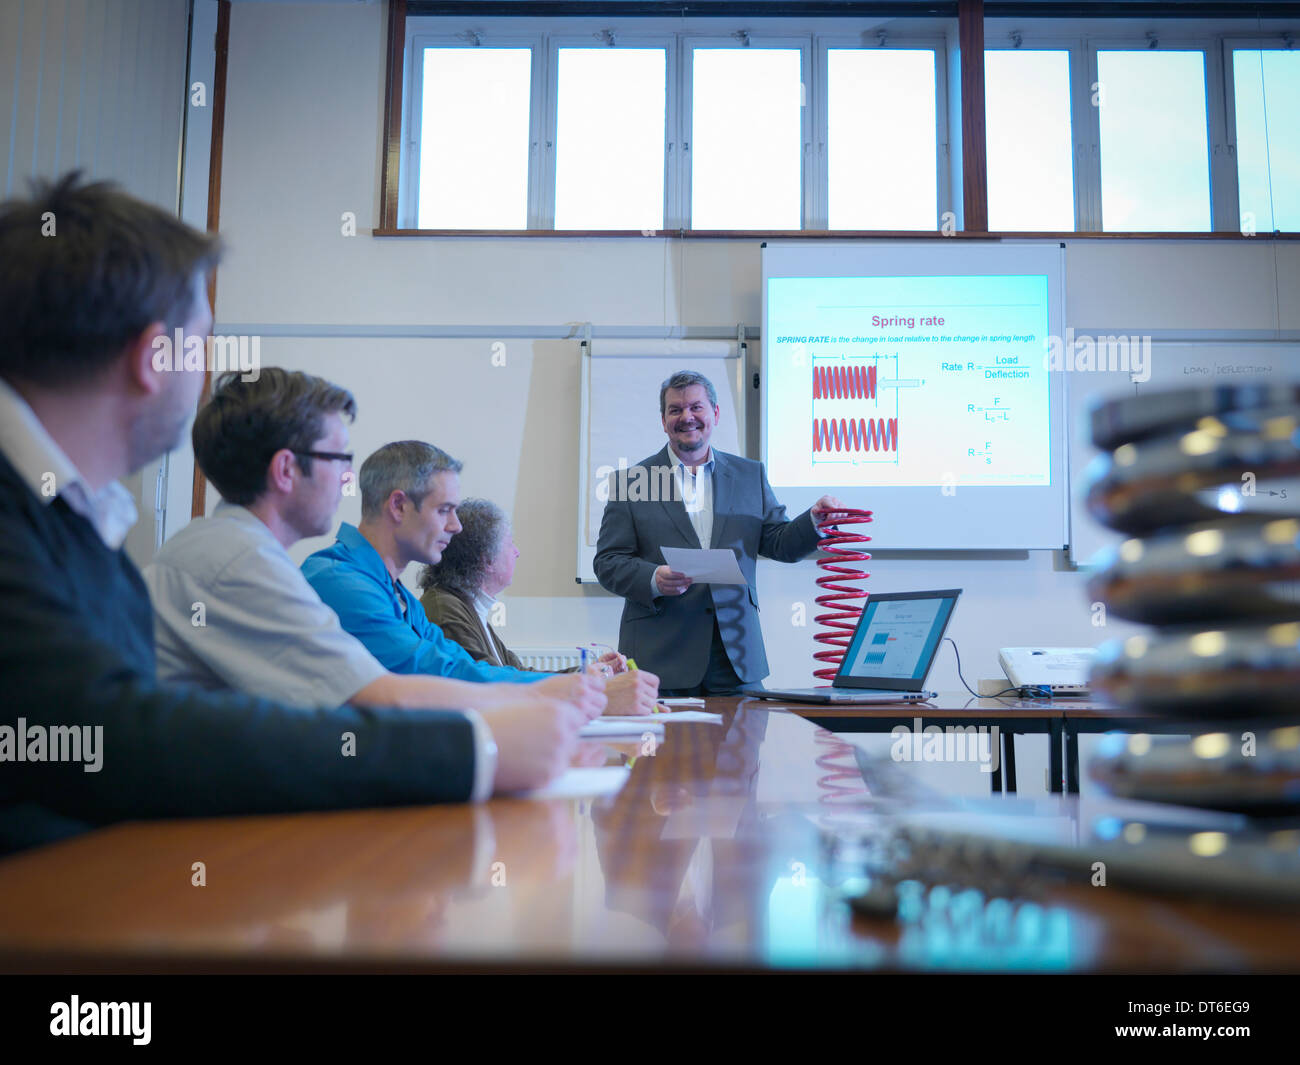 Scientist giving lecture about spring technology in conference room Stock Photo